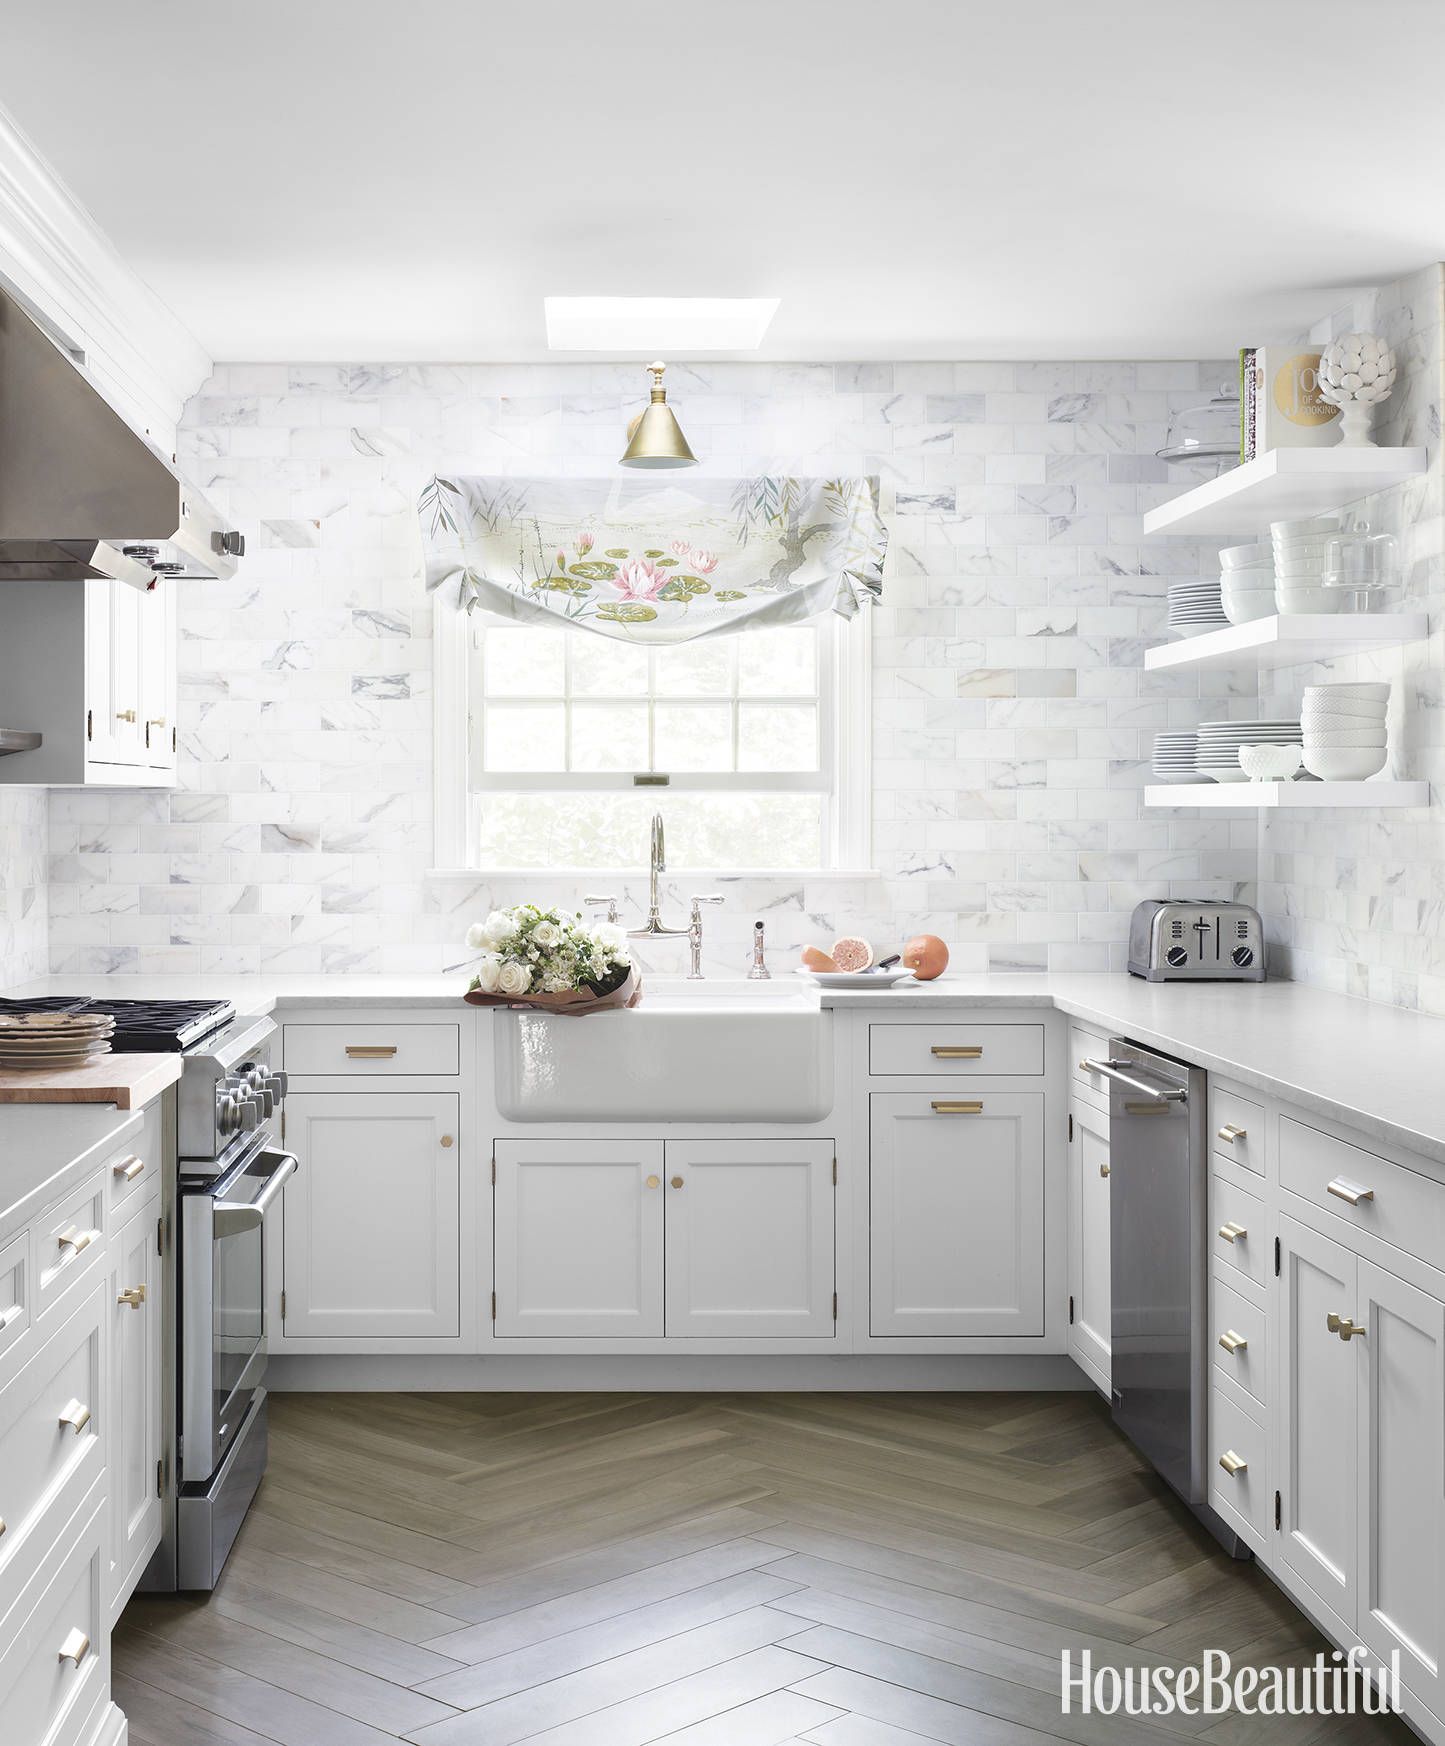 Open Shelving These 15 Kitchens, White Kitchen Cabinets With Open Shelving Units